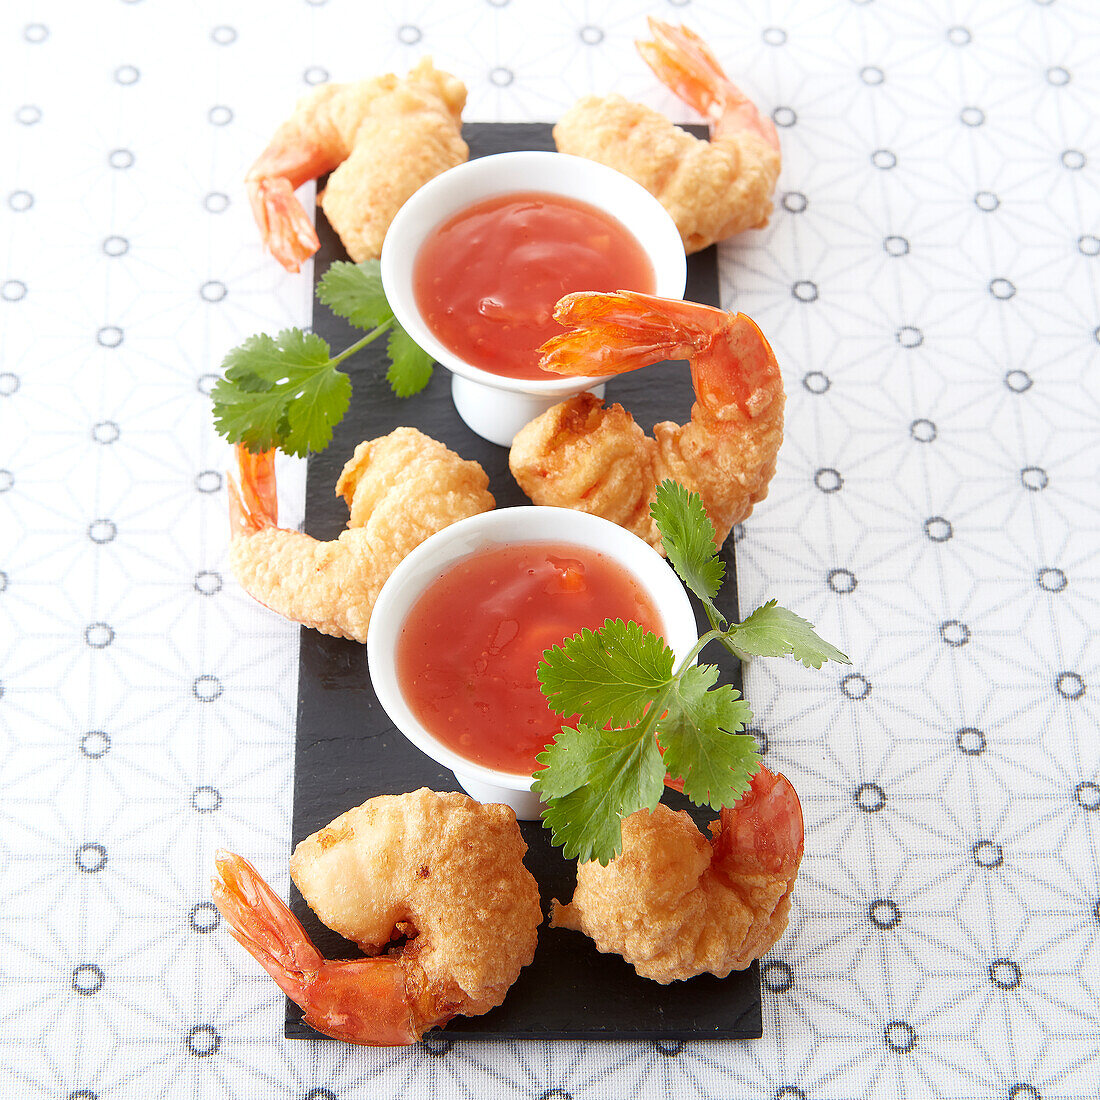 Fried shrimp with sweet and sour sauce